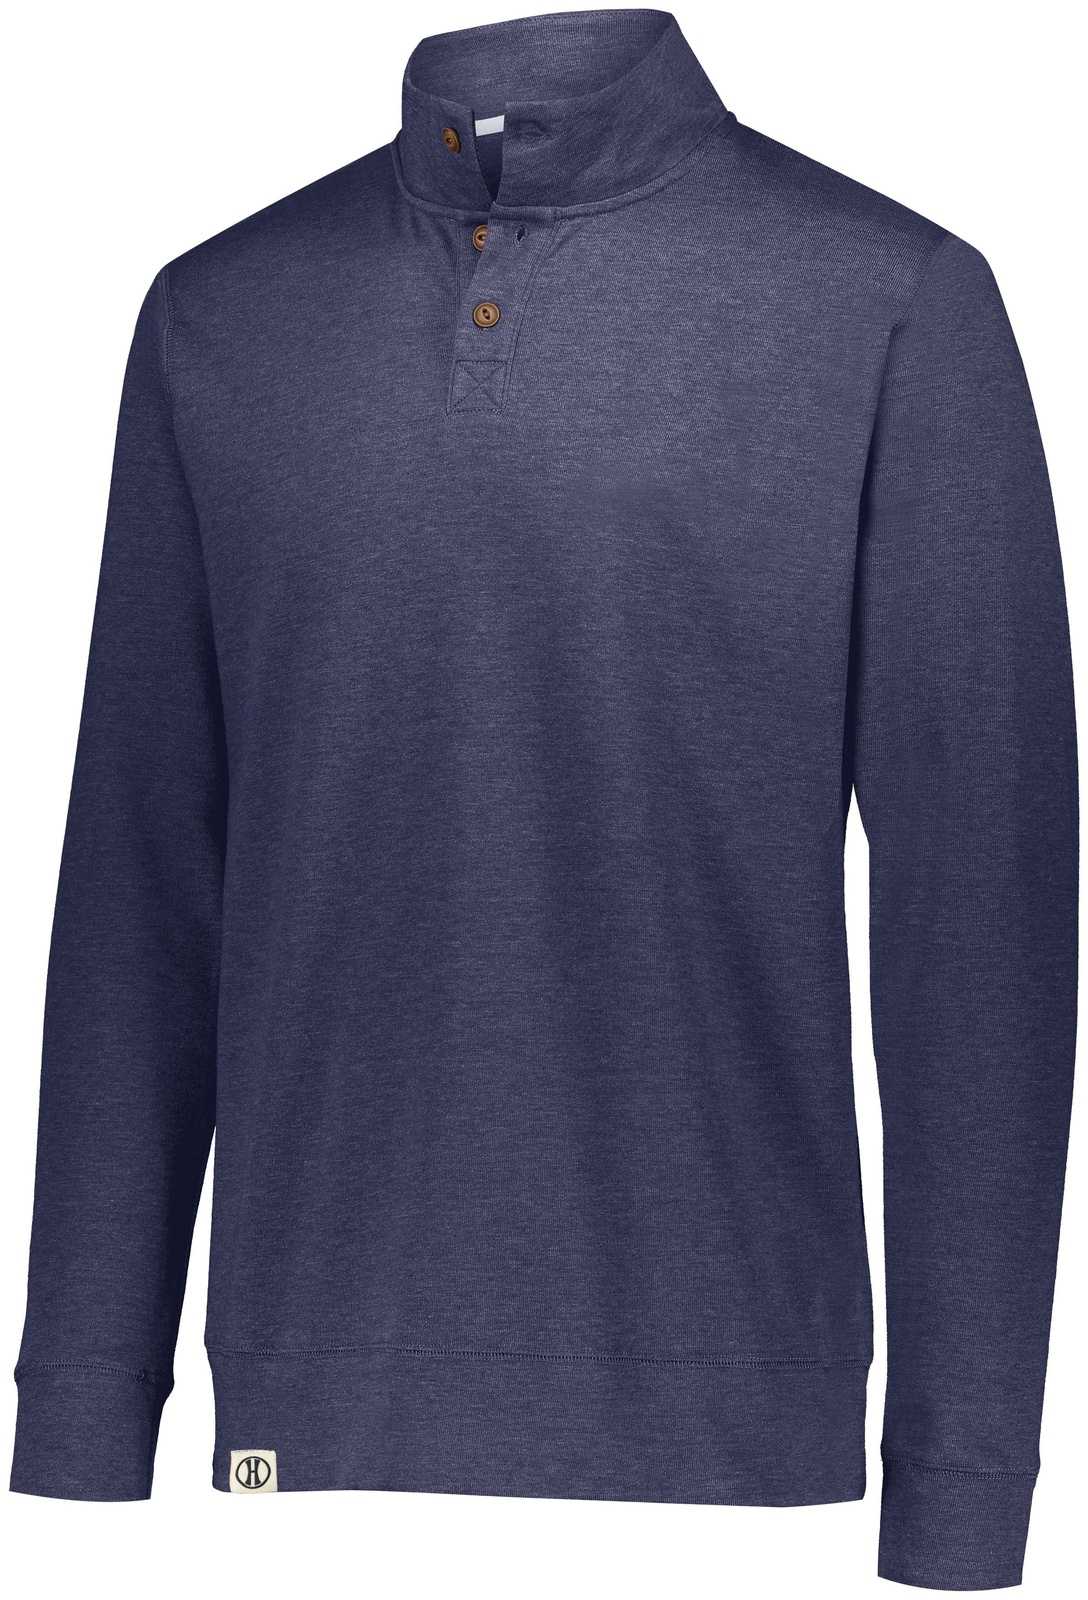 Holloway 229575 Sophomore Pullover - Navy Heather - HIT a Double